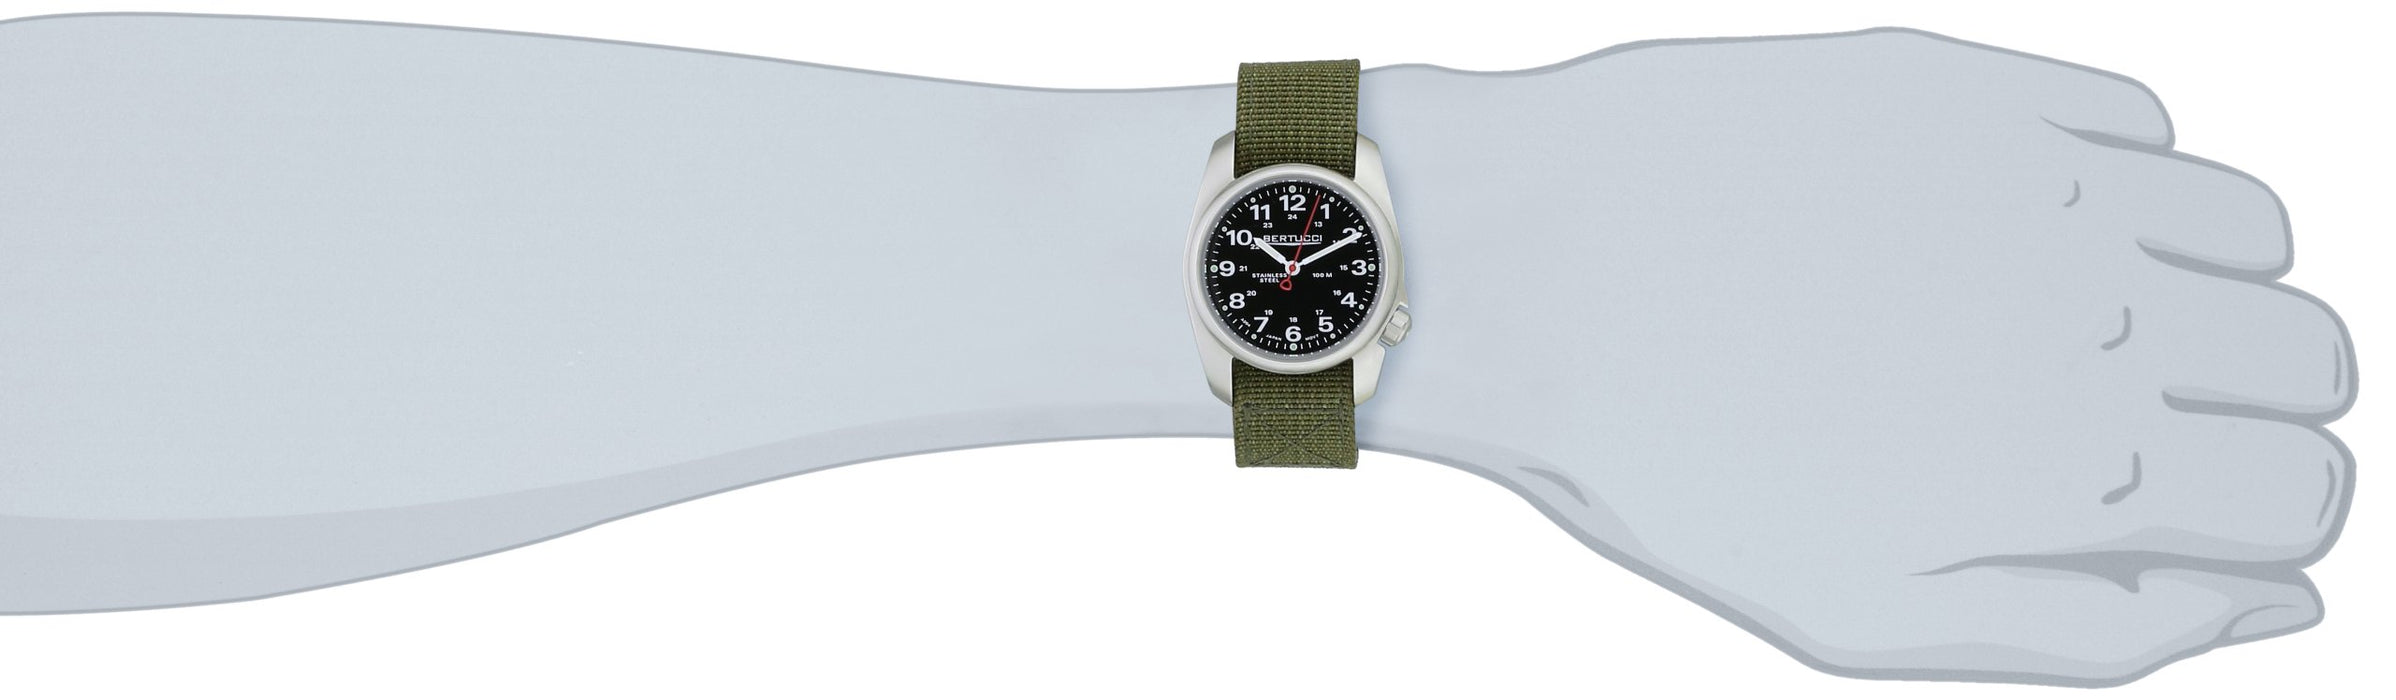 Bertucci A-1S Green Nylon Strap 36mm Stainless Steel Dial Field Watch